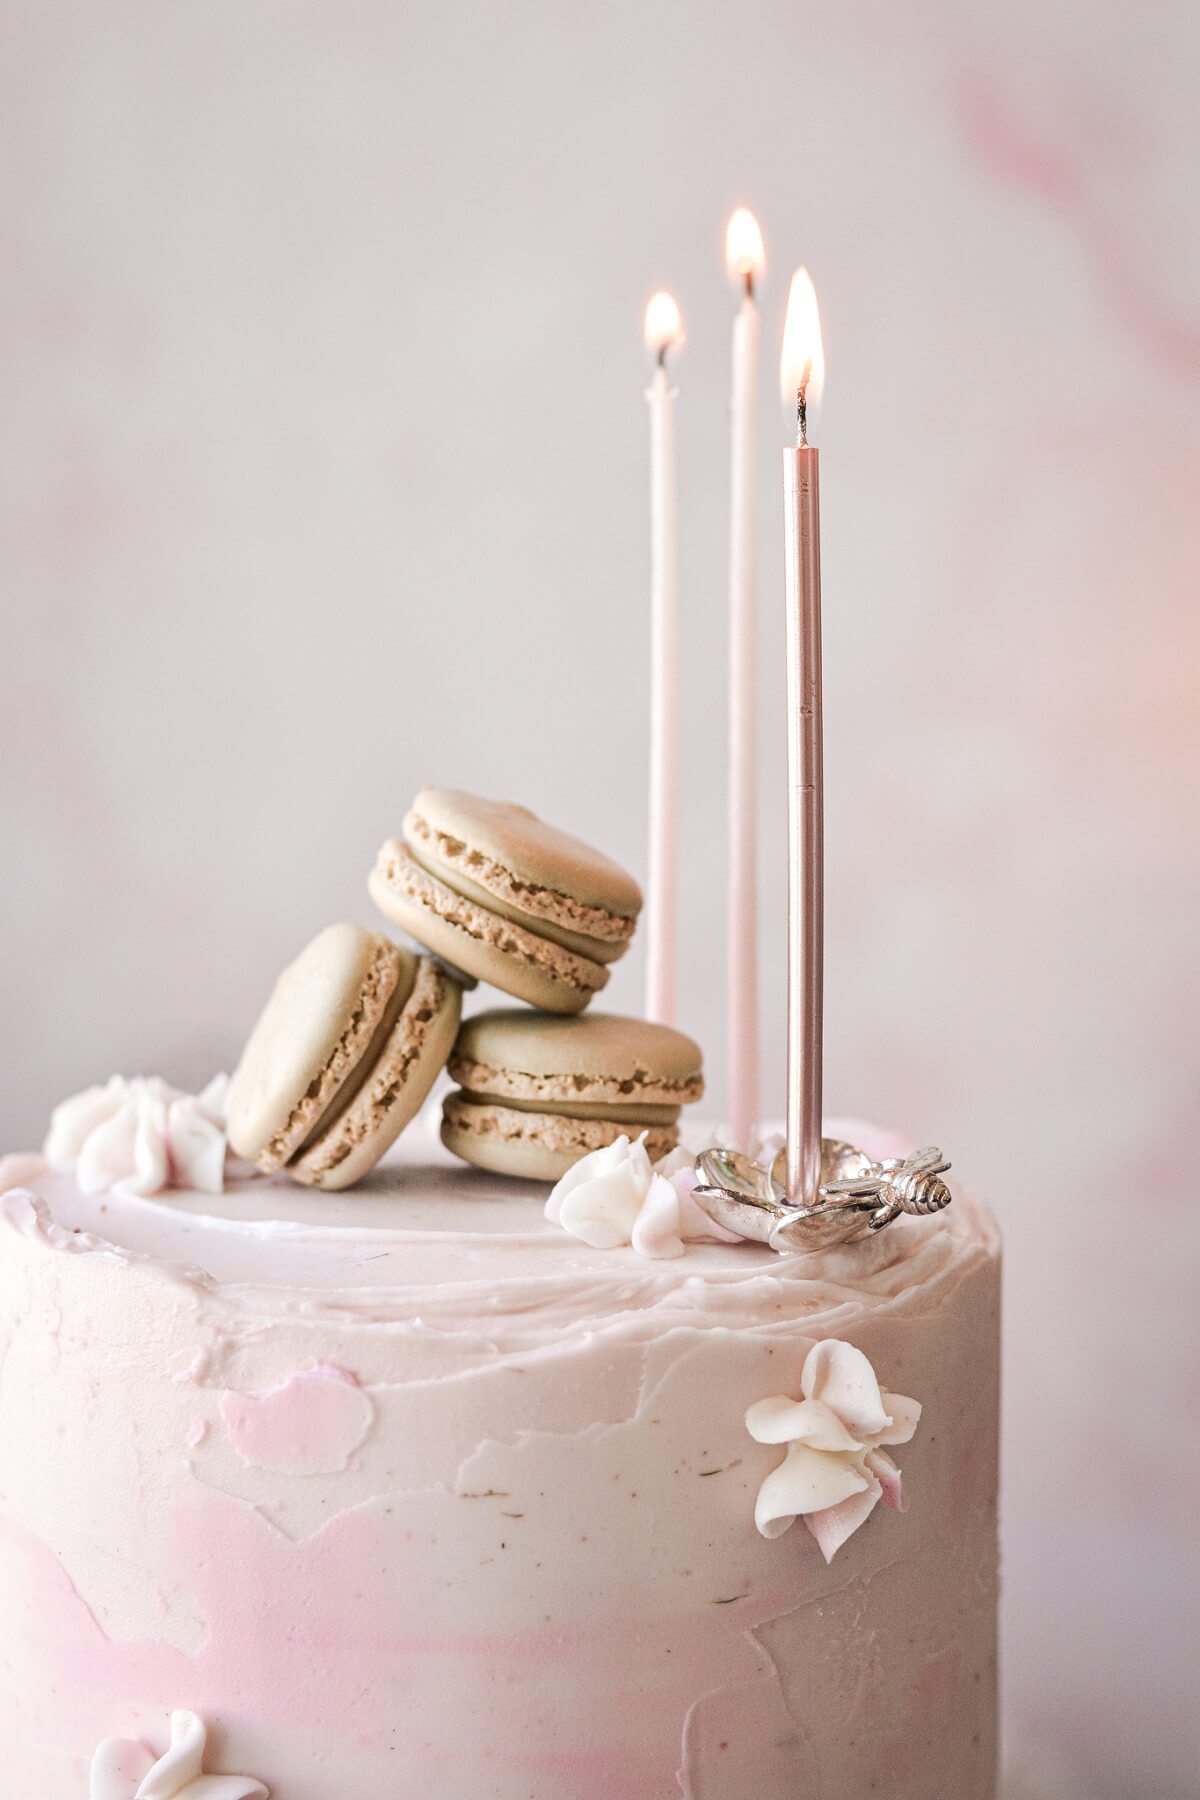 Candles and macarons on top of a cake.